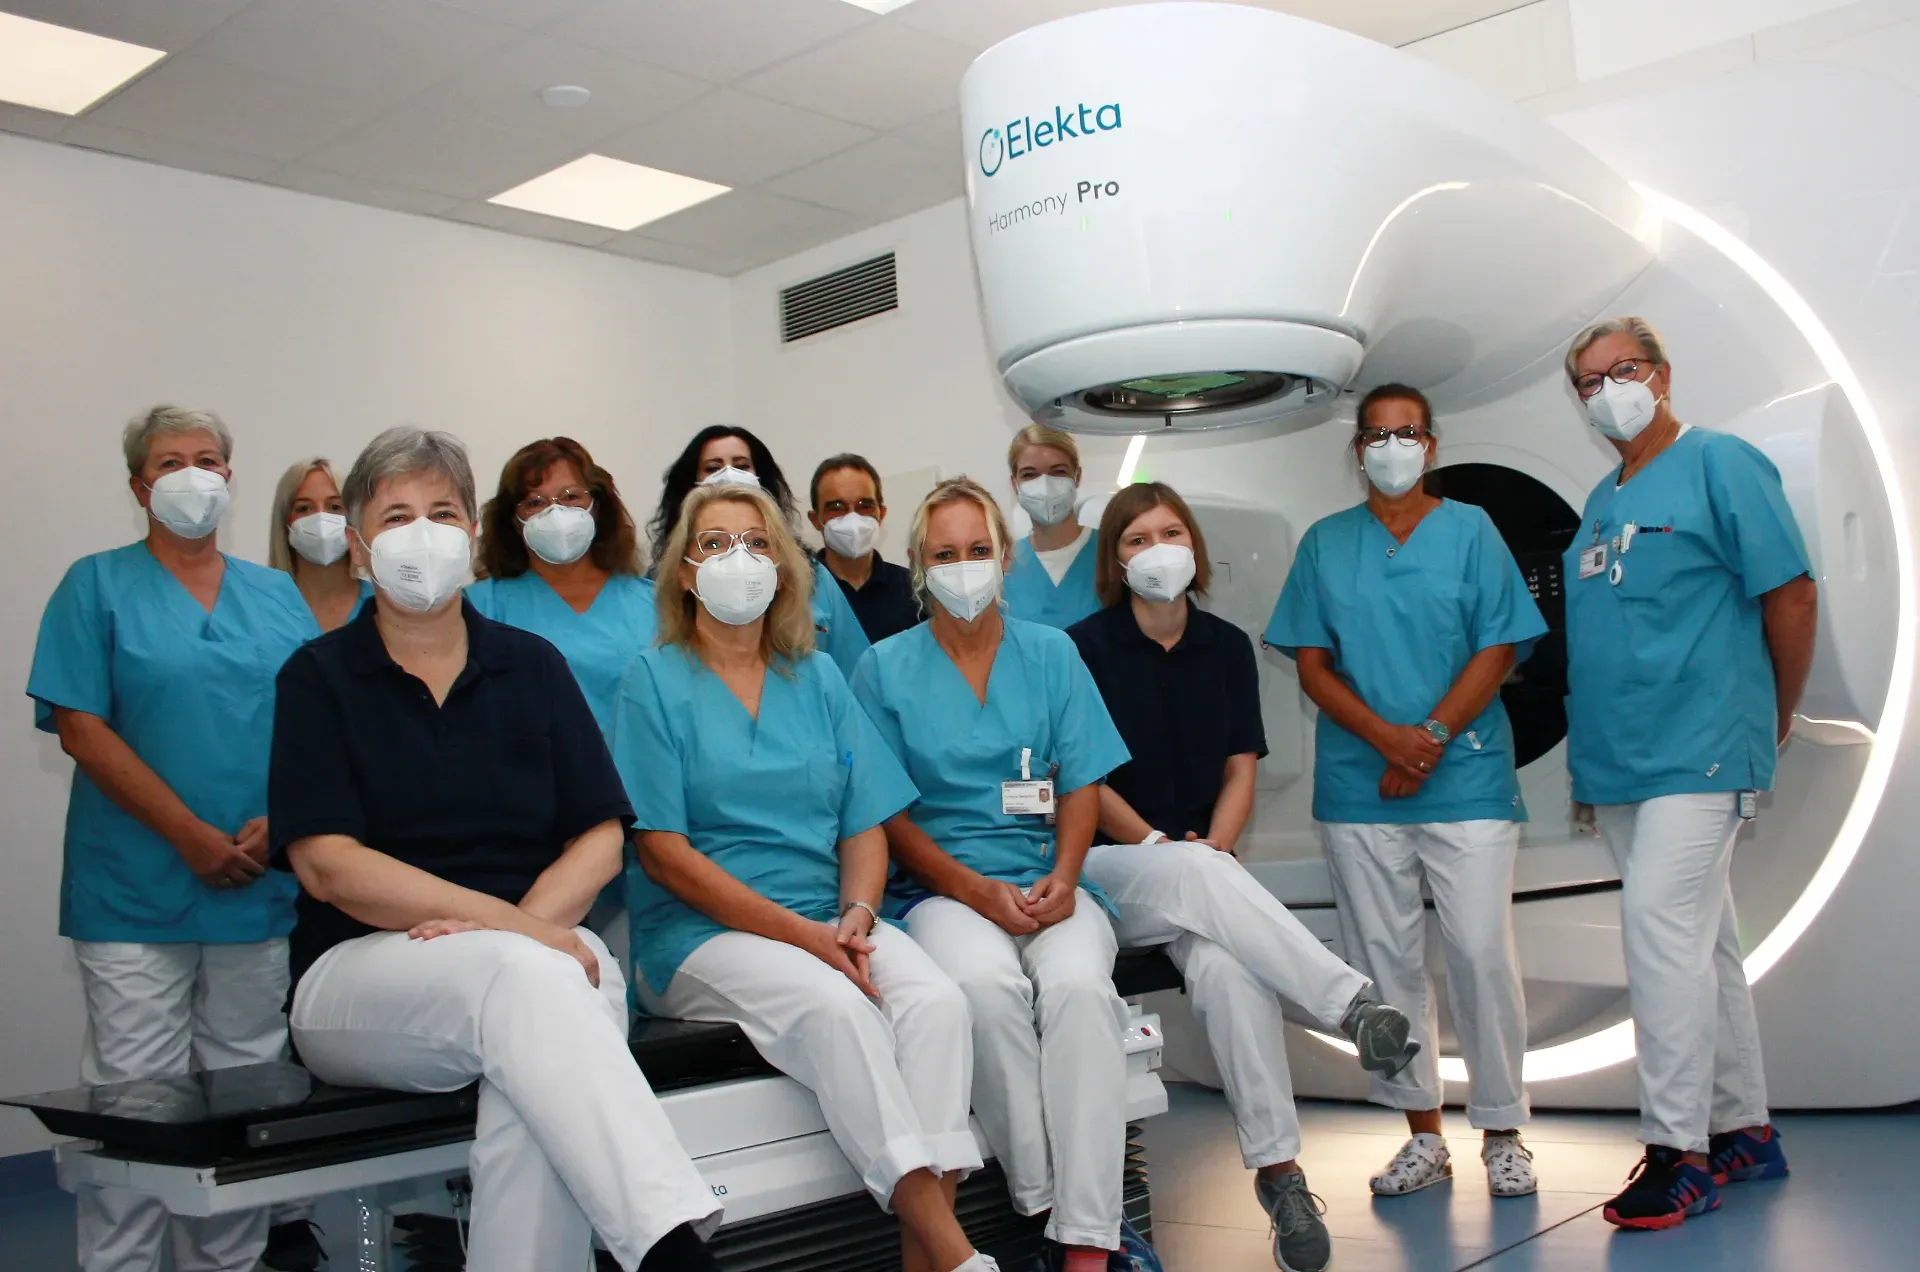 Members of the radiotherapy treatment team at Lungenklinik Hemer in Germany